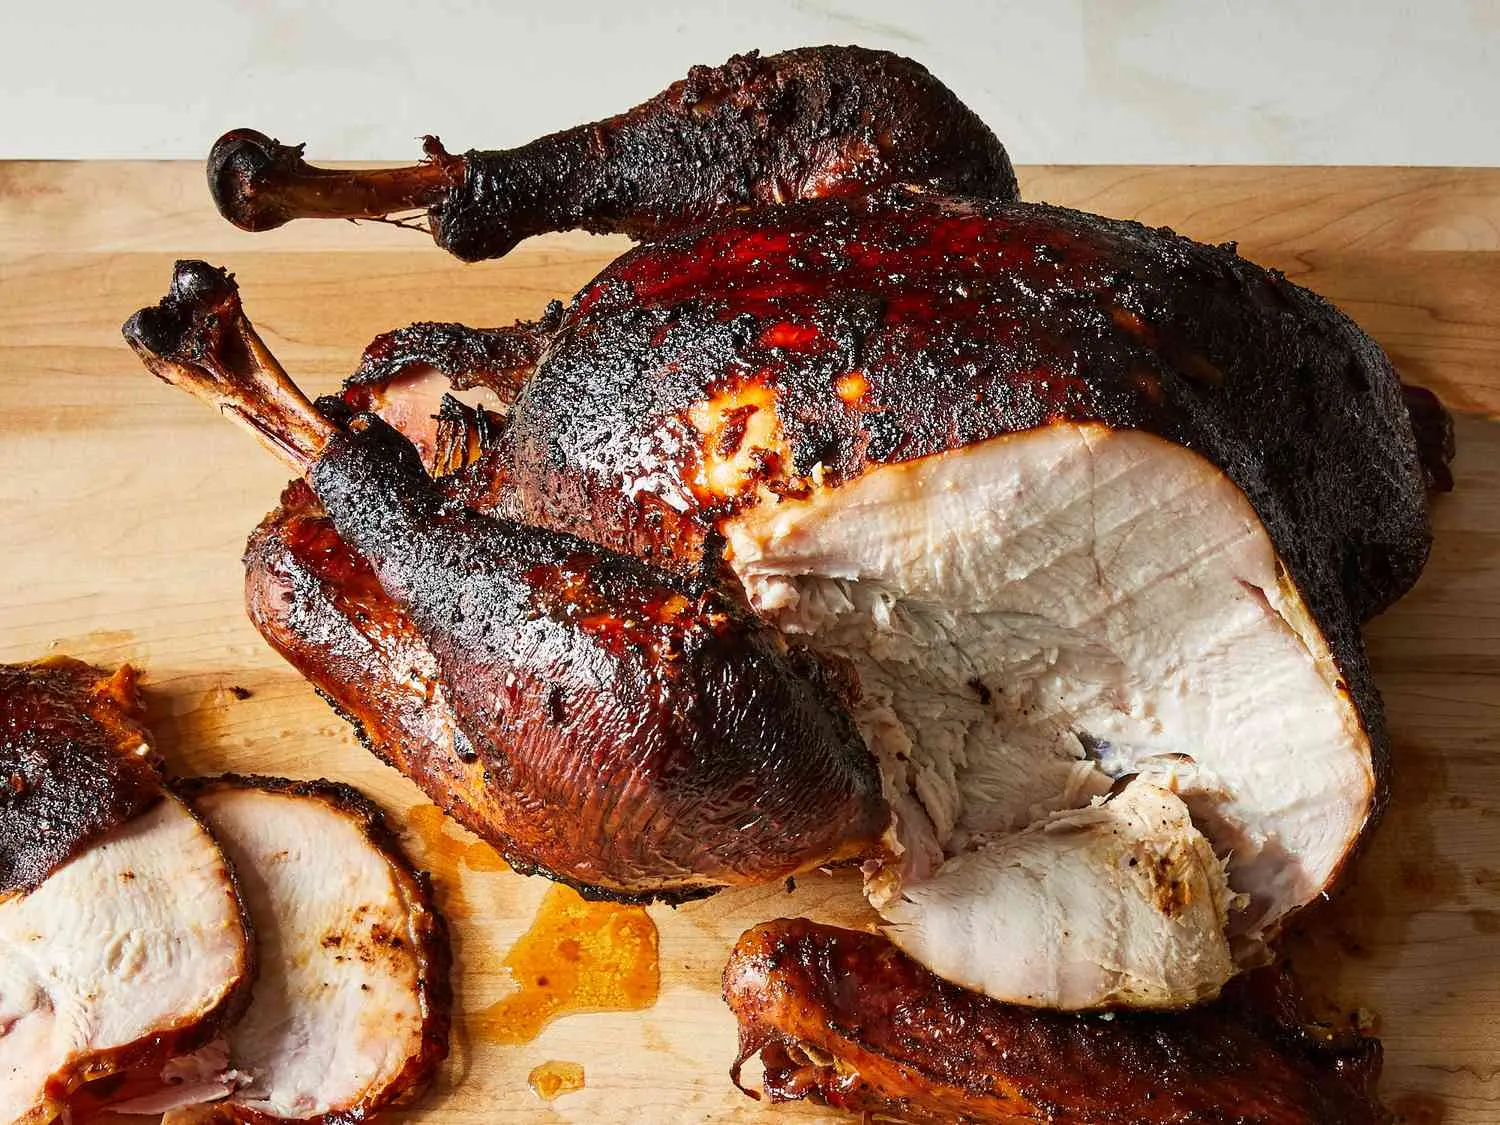 smoked turkey recipes - What to do with smoked turkey when done